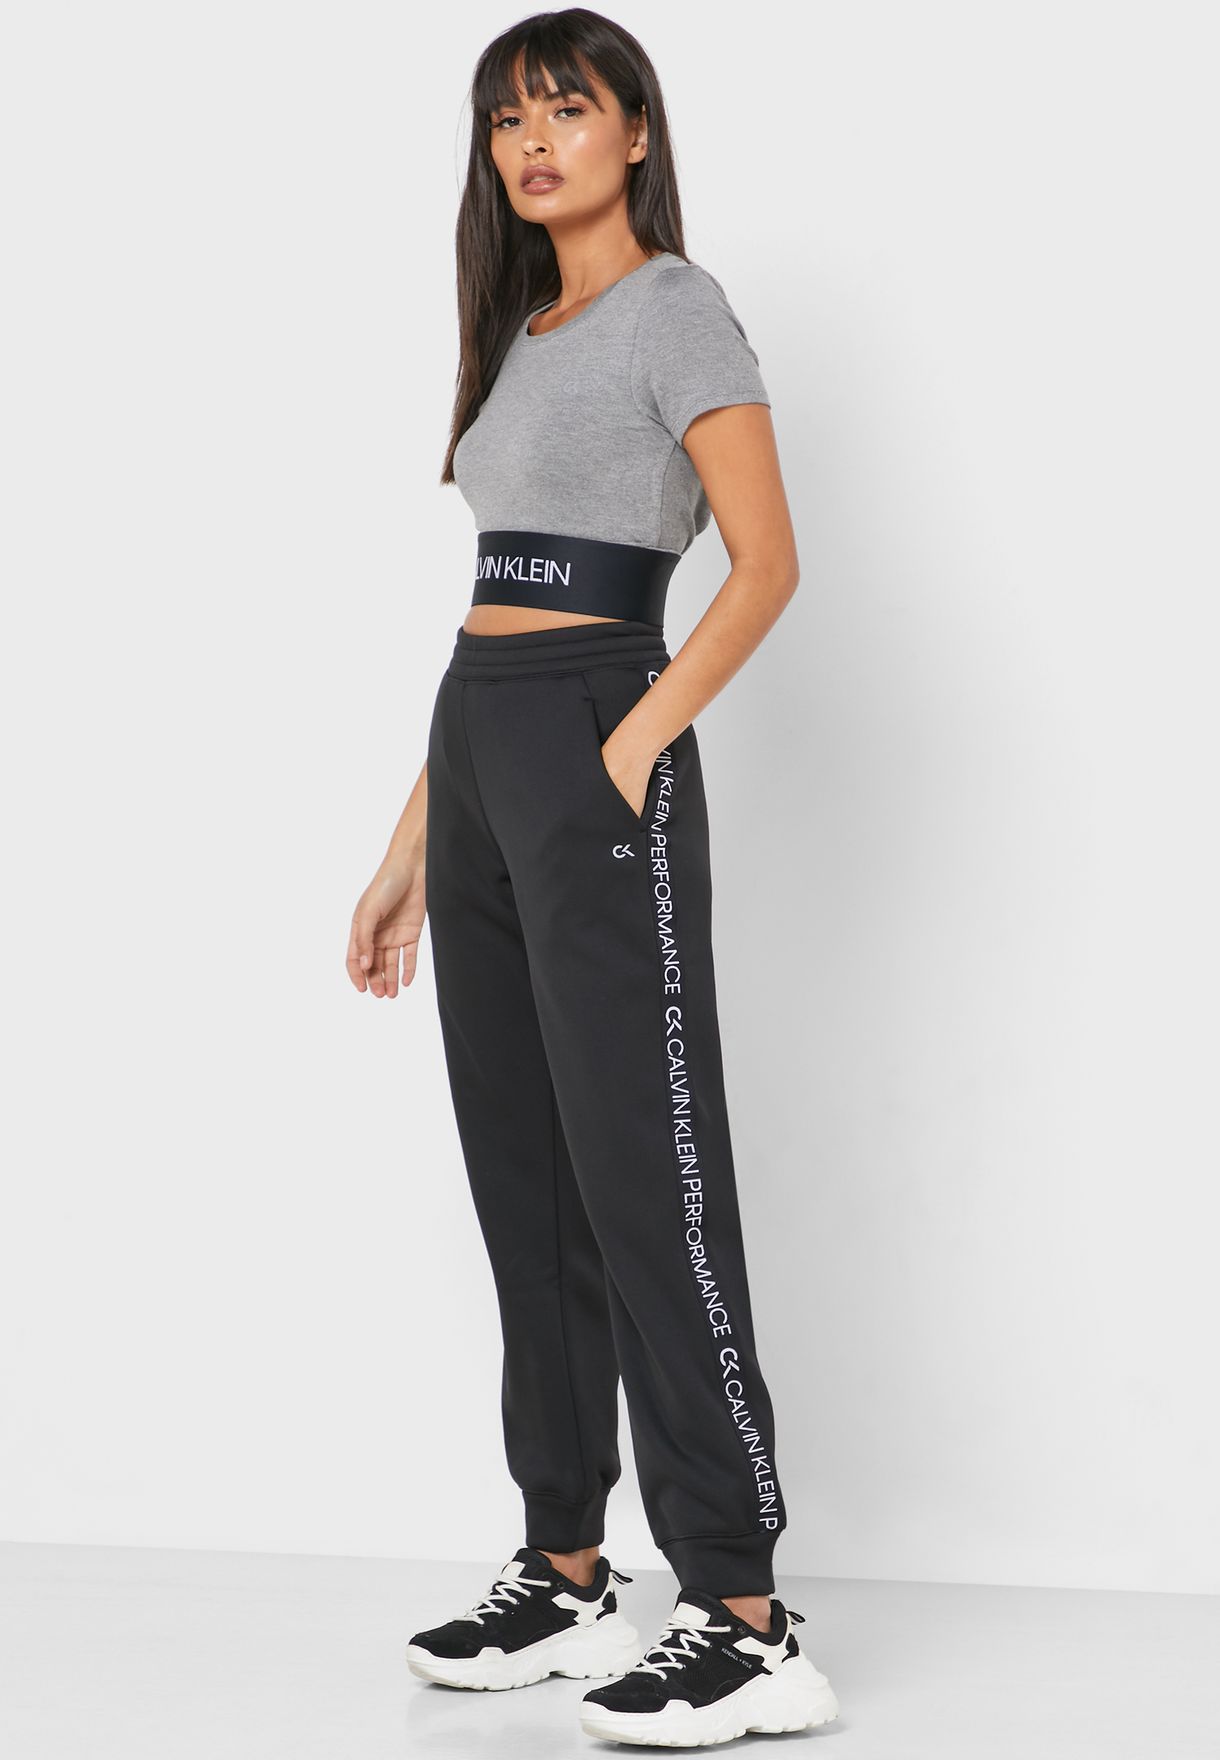 calvin klein cropped hoodie and shorts set